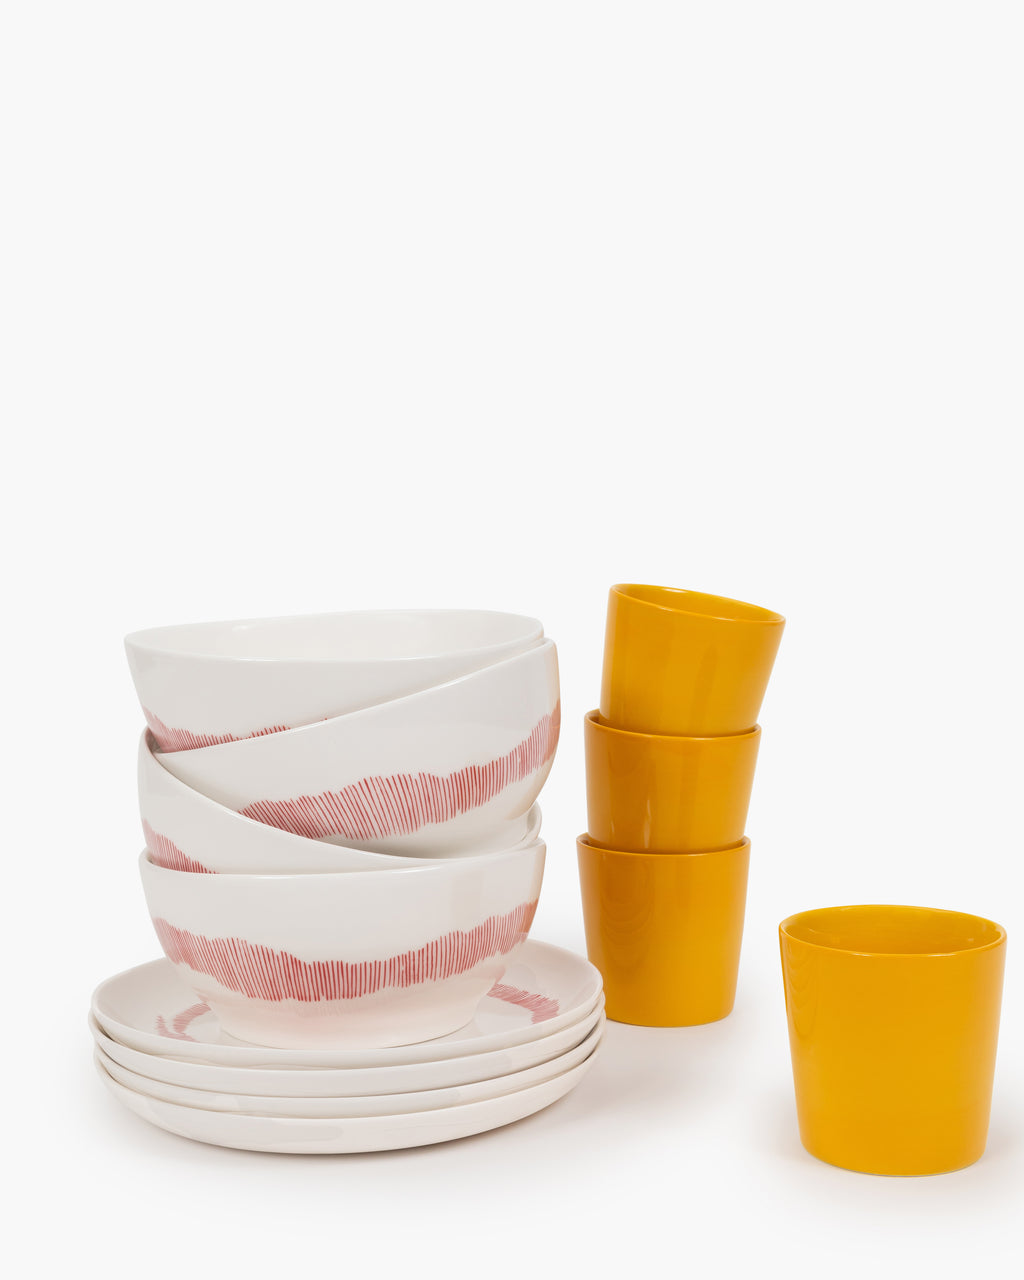 Breakfast Set 12 pieces - Feast tableware by Ottolenghi - White